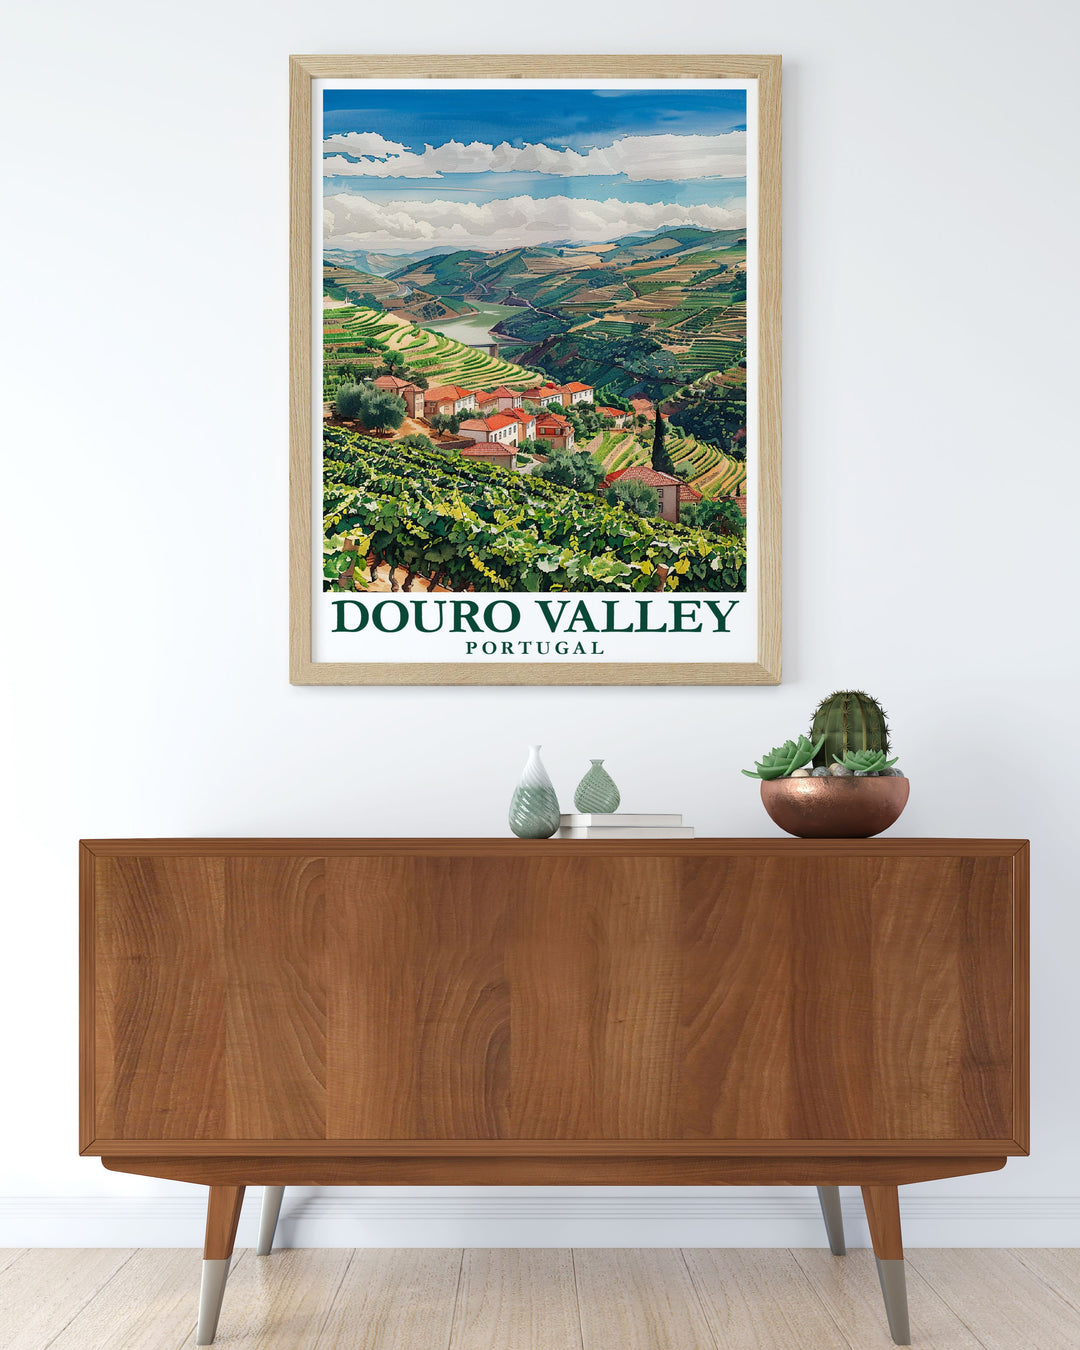 Home decor print illustrating the scenic beauty of the Douro Valley, highlighting the lush vineyards and traditional quintas of Portugal’s wine region.